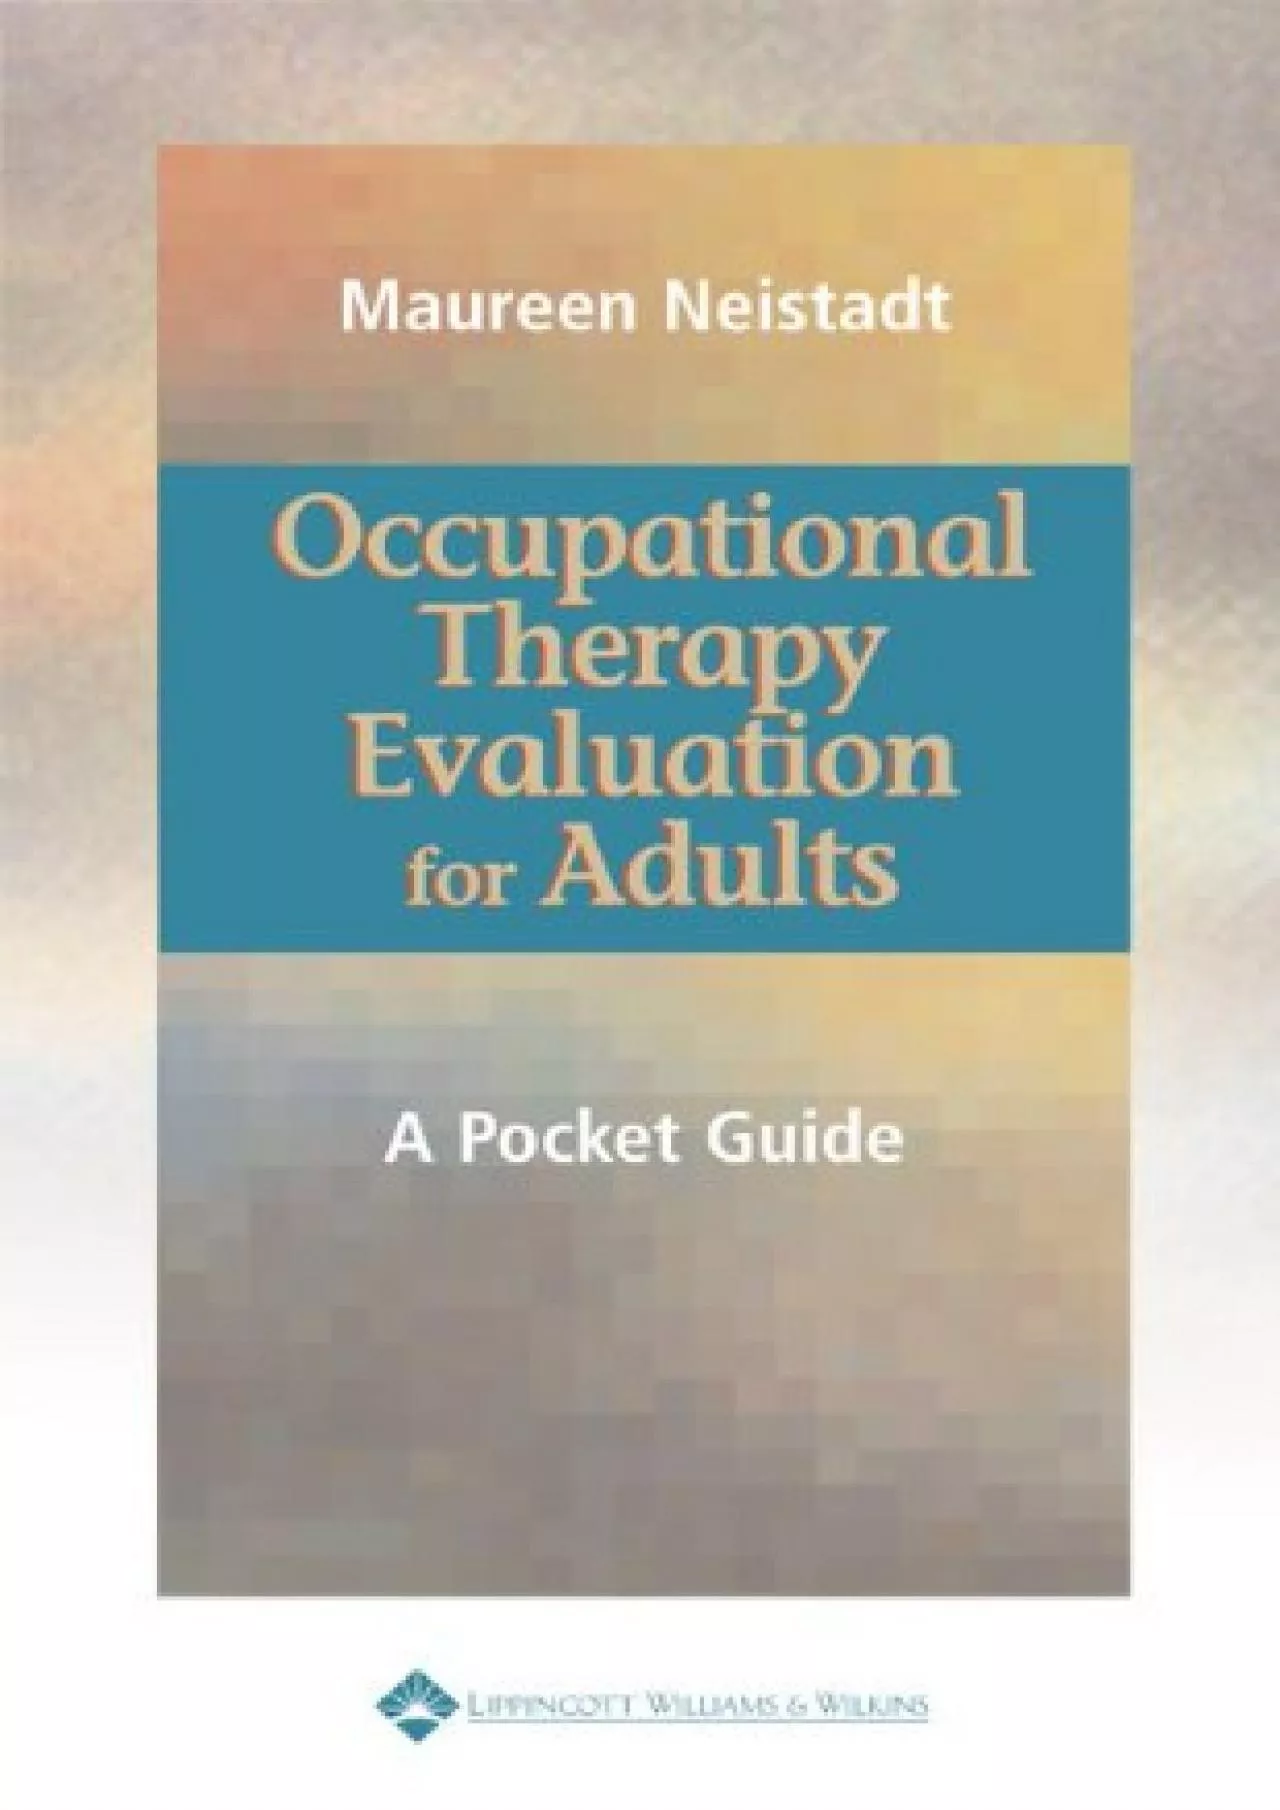 (EBOOK)-Occupational Therapy Evaluation for Adults: A Pocket Guide